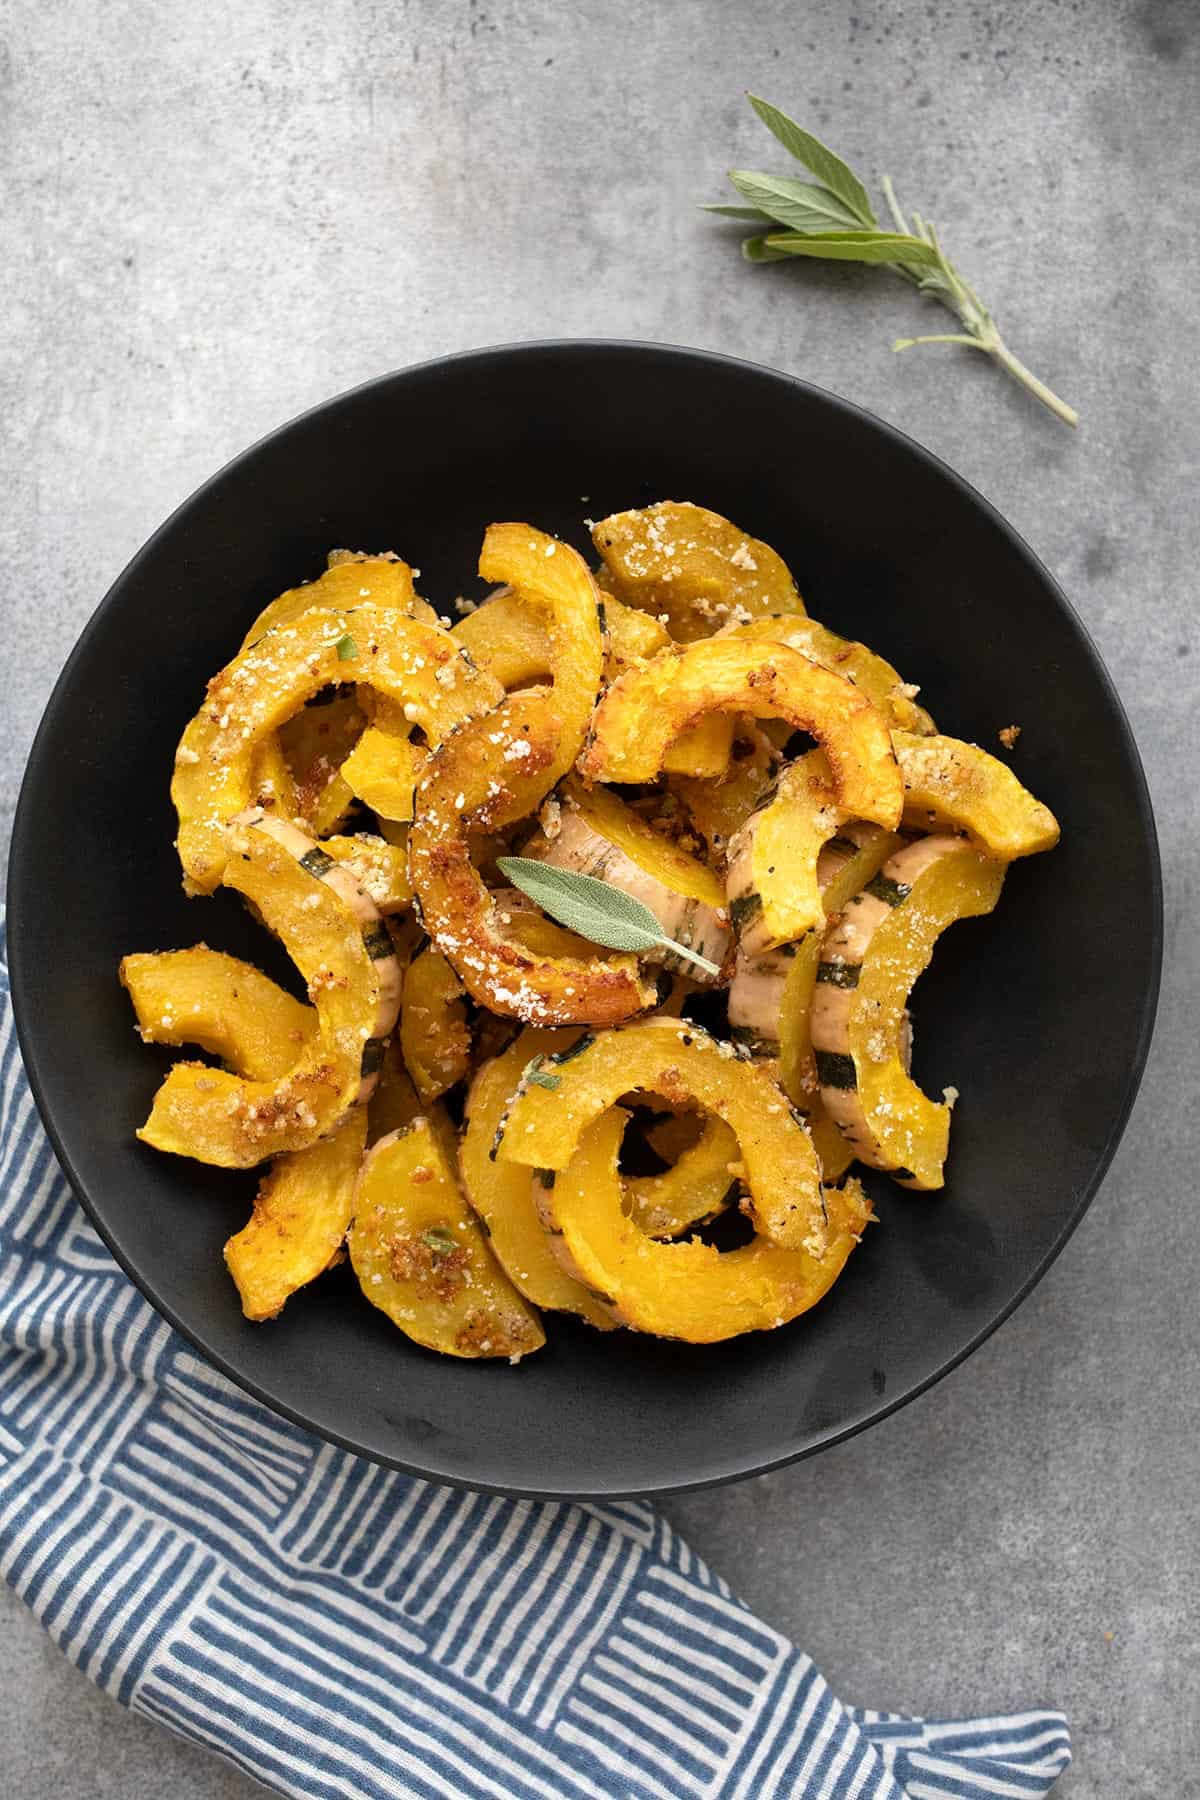 Top down image of Roasted Delicata Squash in a large black bowl on a concrete table.